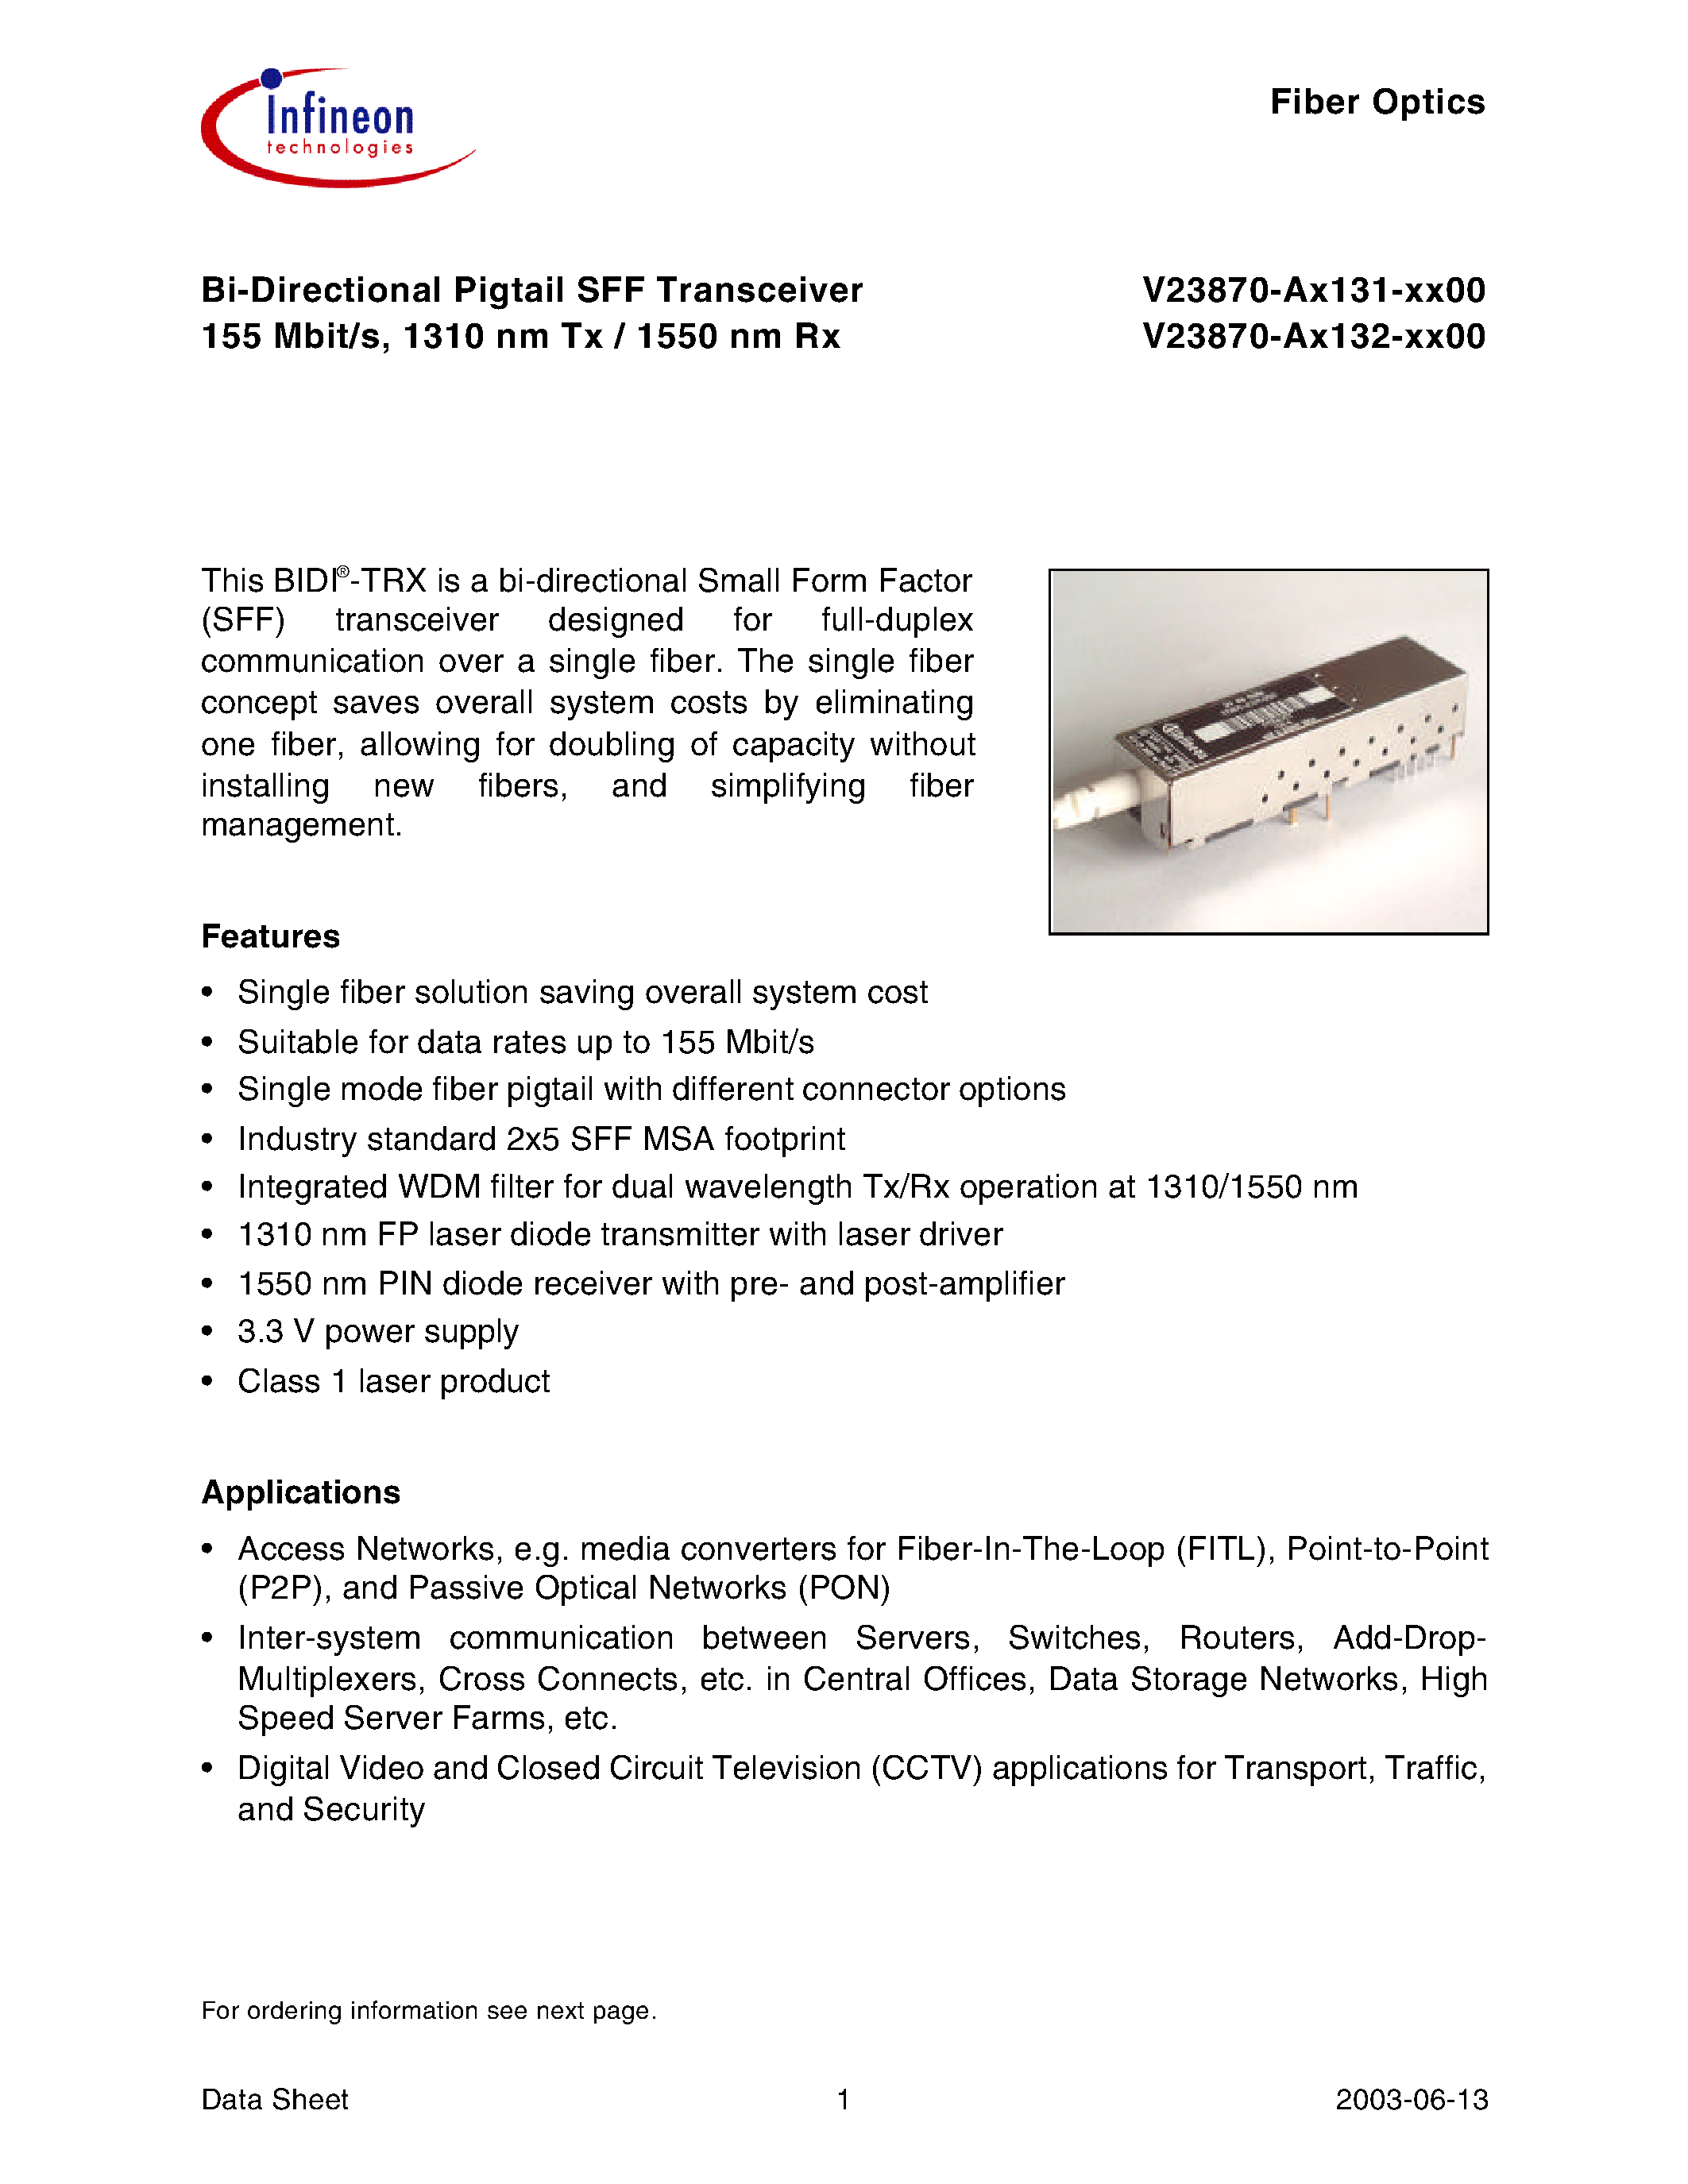 Datasheet V23870-A3131-H200 - Bi-Directional Pigtail SFF Transceiver 155 Mbit/s/ 1310 nm Tx / 1550 nm Rx page 1